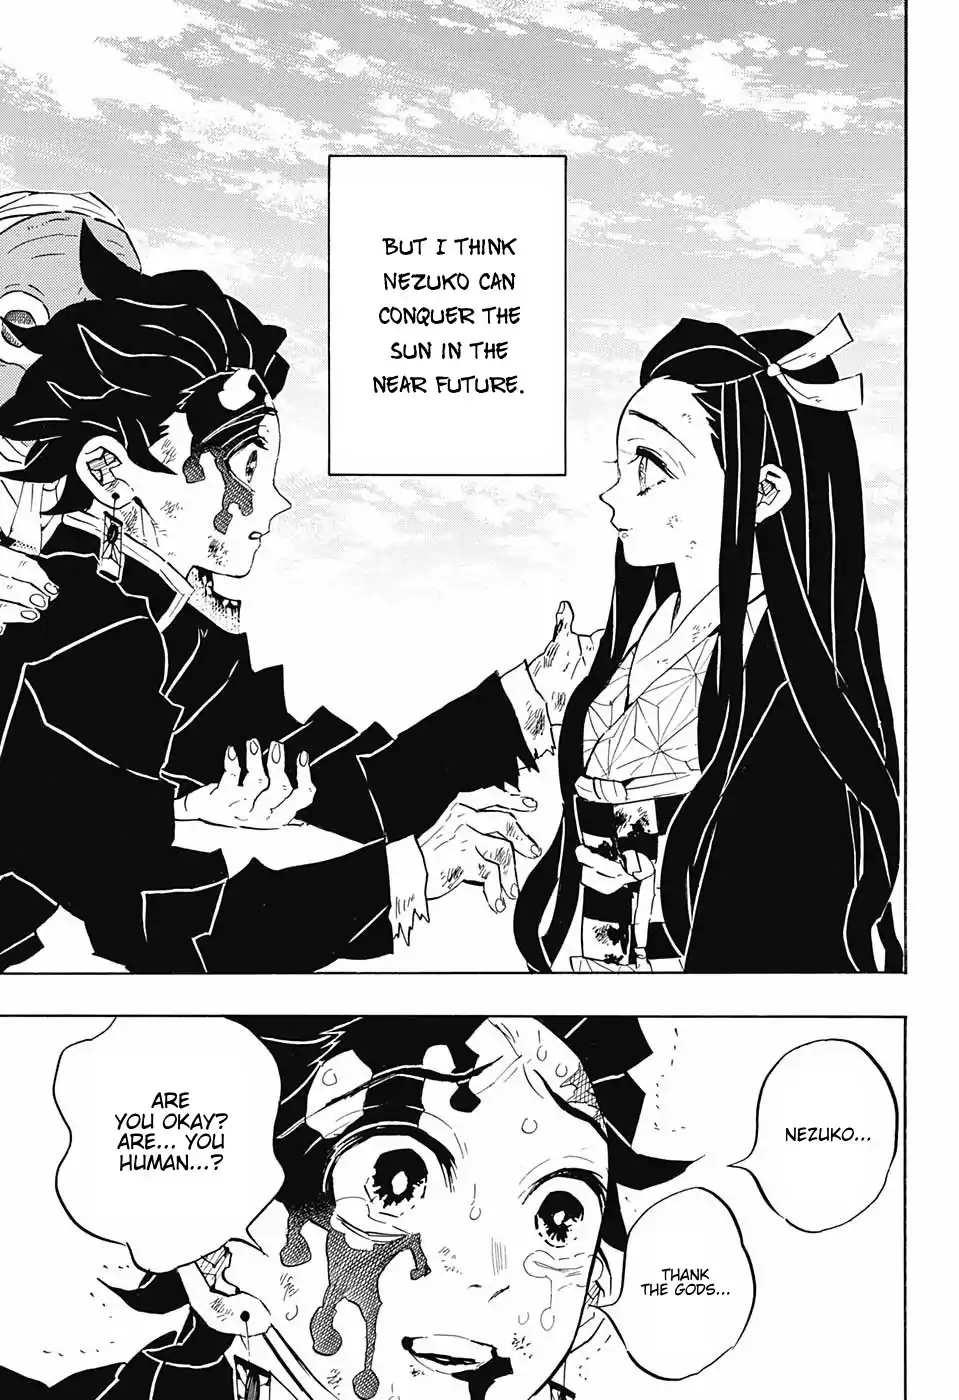 I was born in Busan first — Theory on why Nezuko is a “special demon”